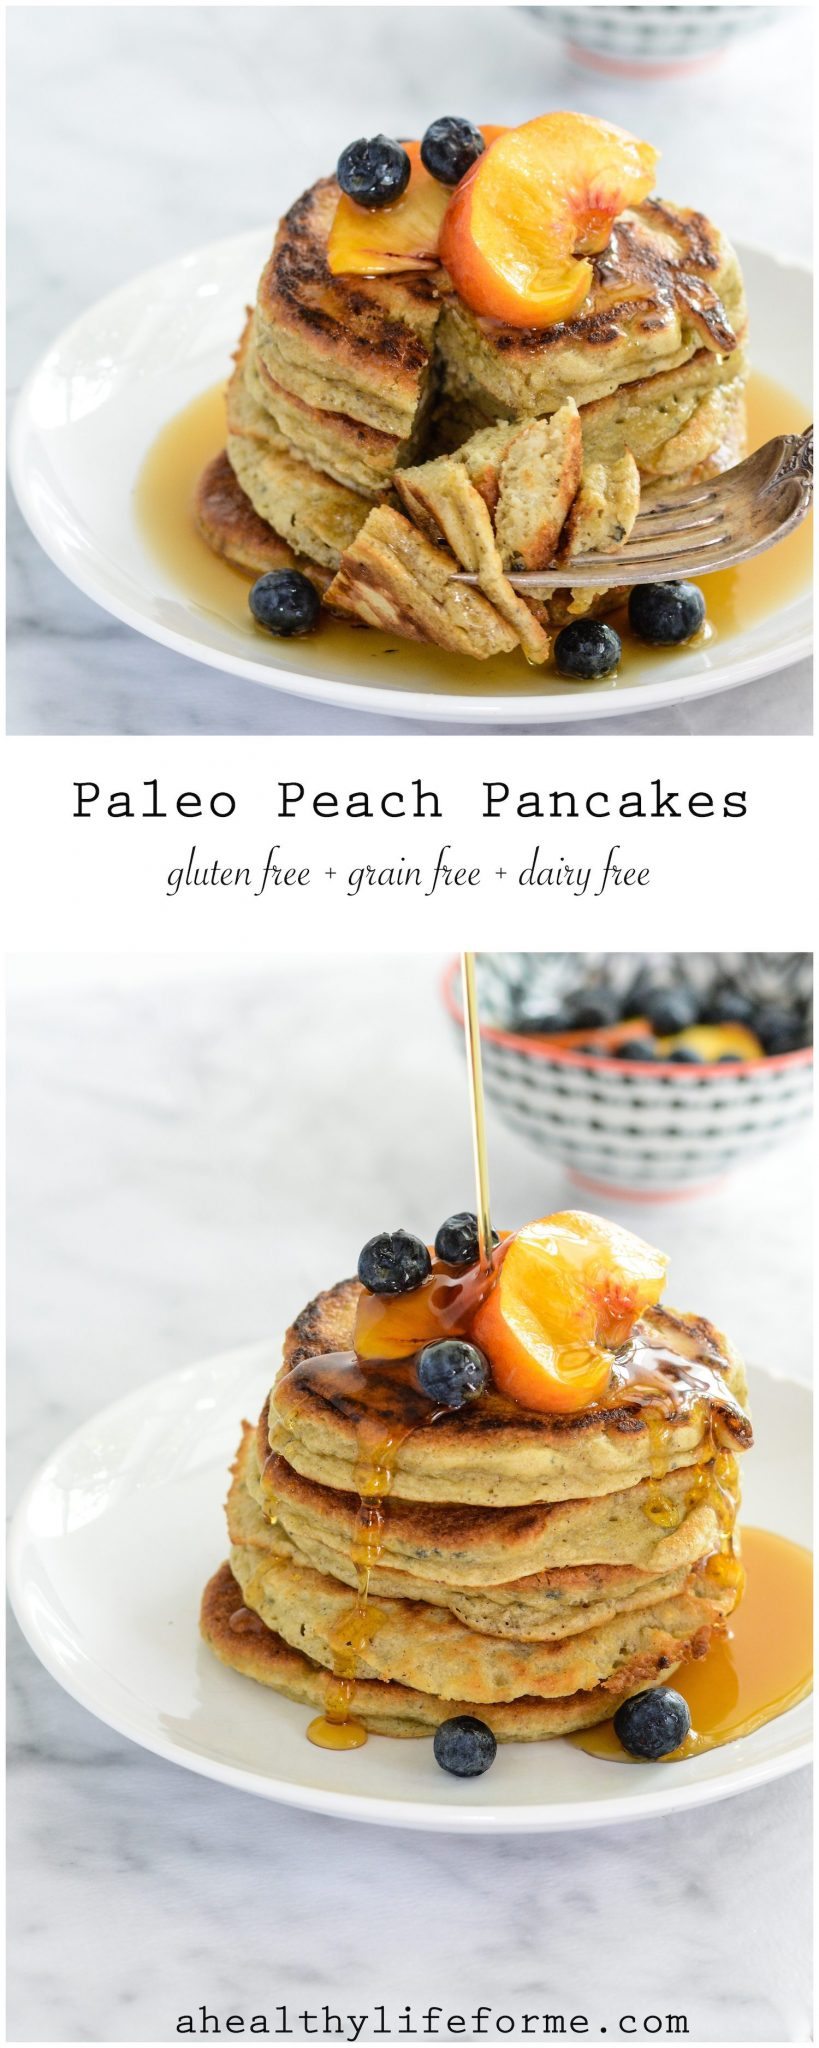 Paleo Peach Pancakes are the best little paleo pancake you ever did make. Gluten Free, Grain Free, Dairy Free | ahealthylifeforme.com